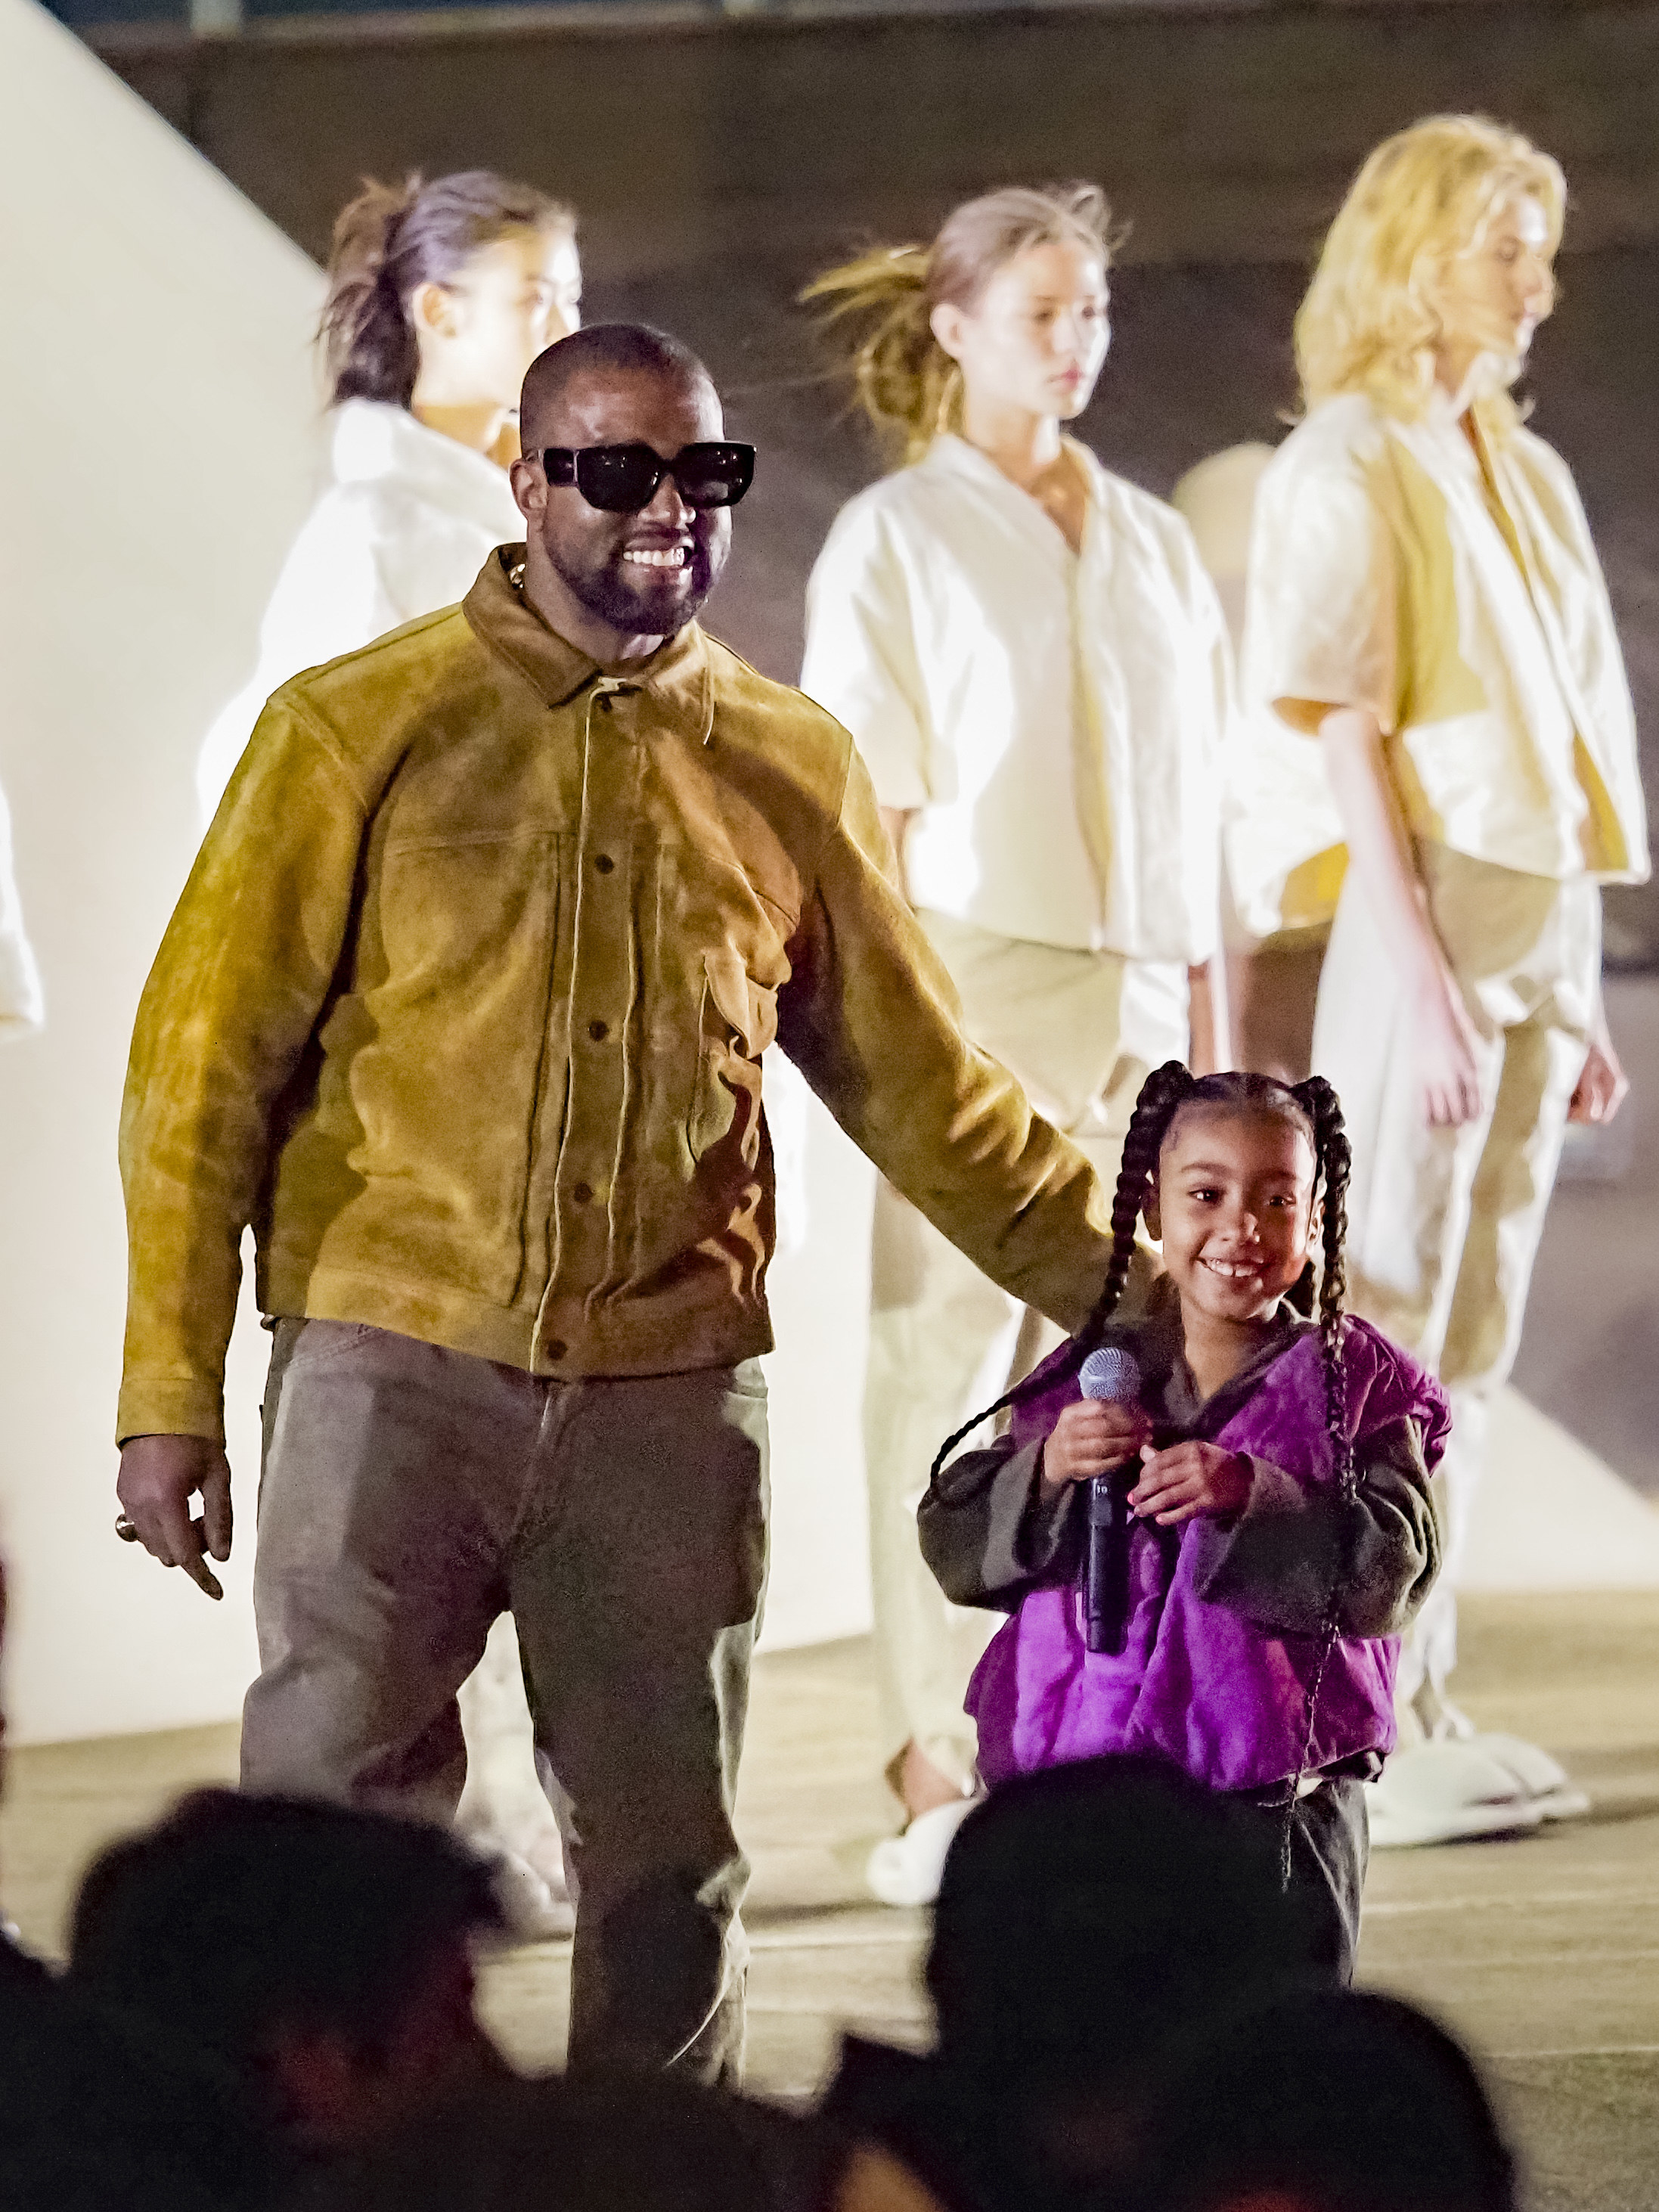 Ye with one of his children